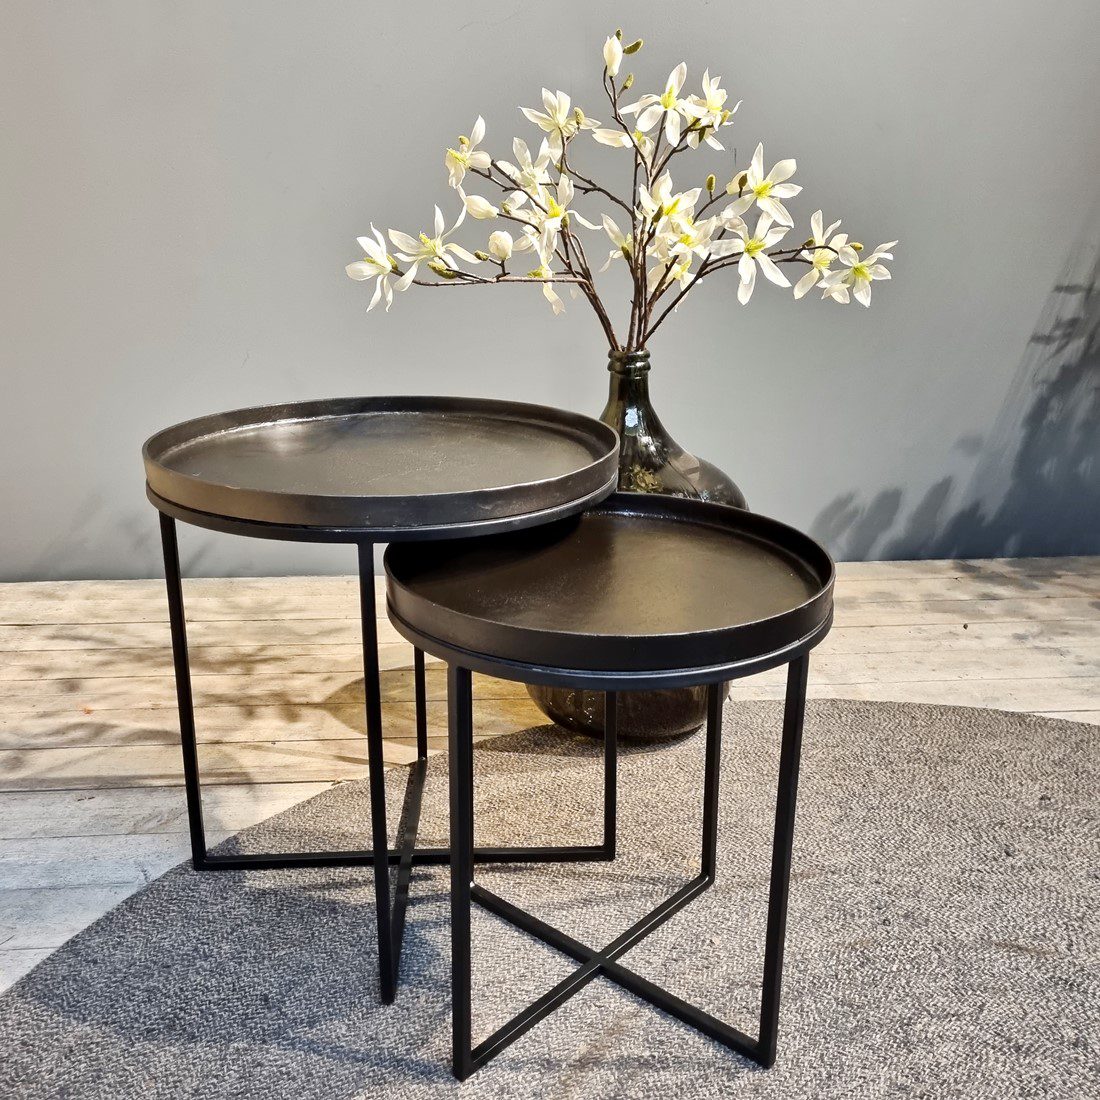 lead-bronze-side-table-52-46-set-of-2